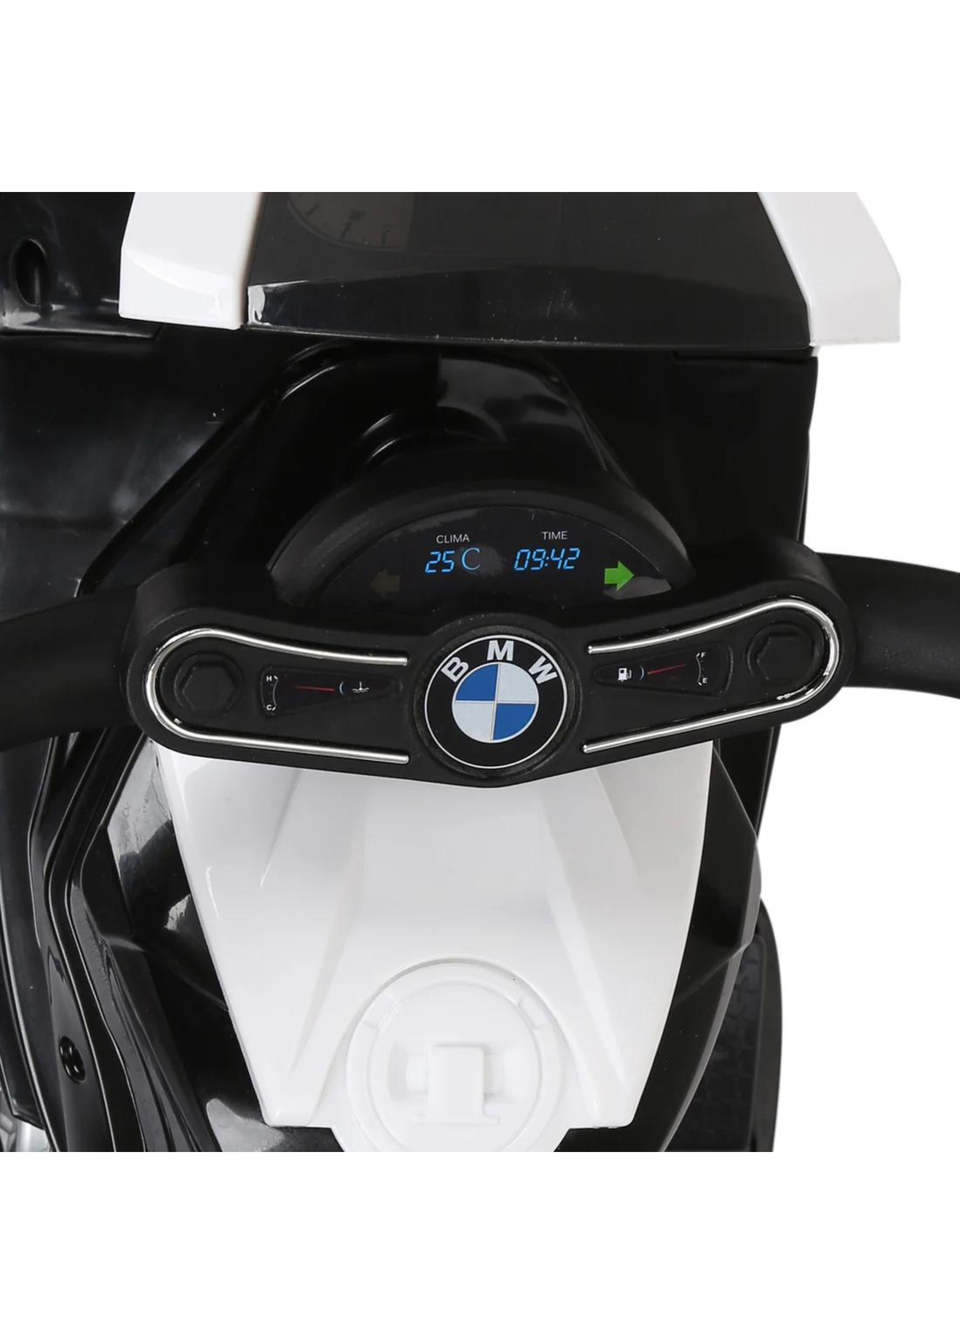 HOMCOM Kids Electric Ride on Motorcycle BMW Licensed with Headlights and Music (Black)